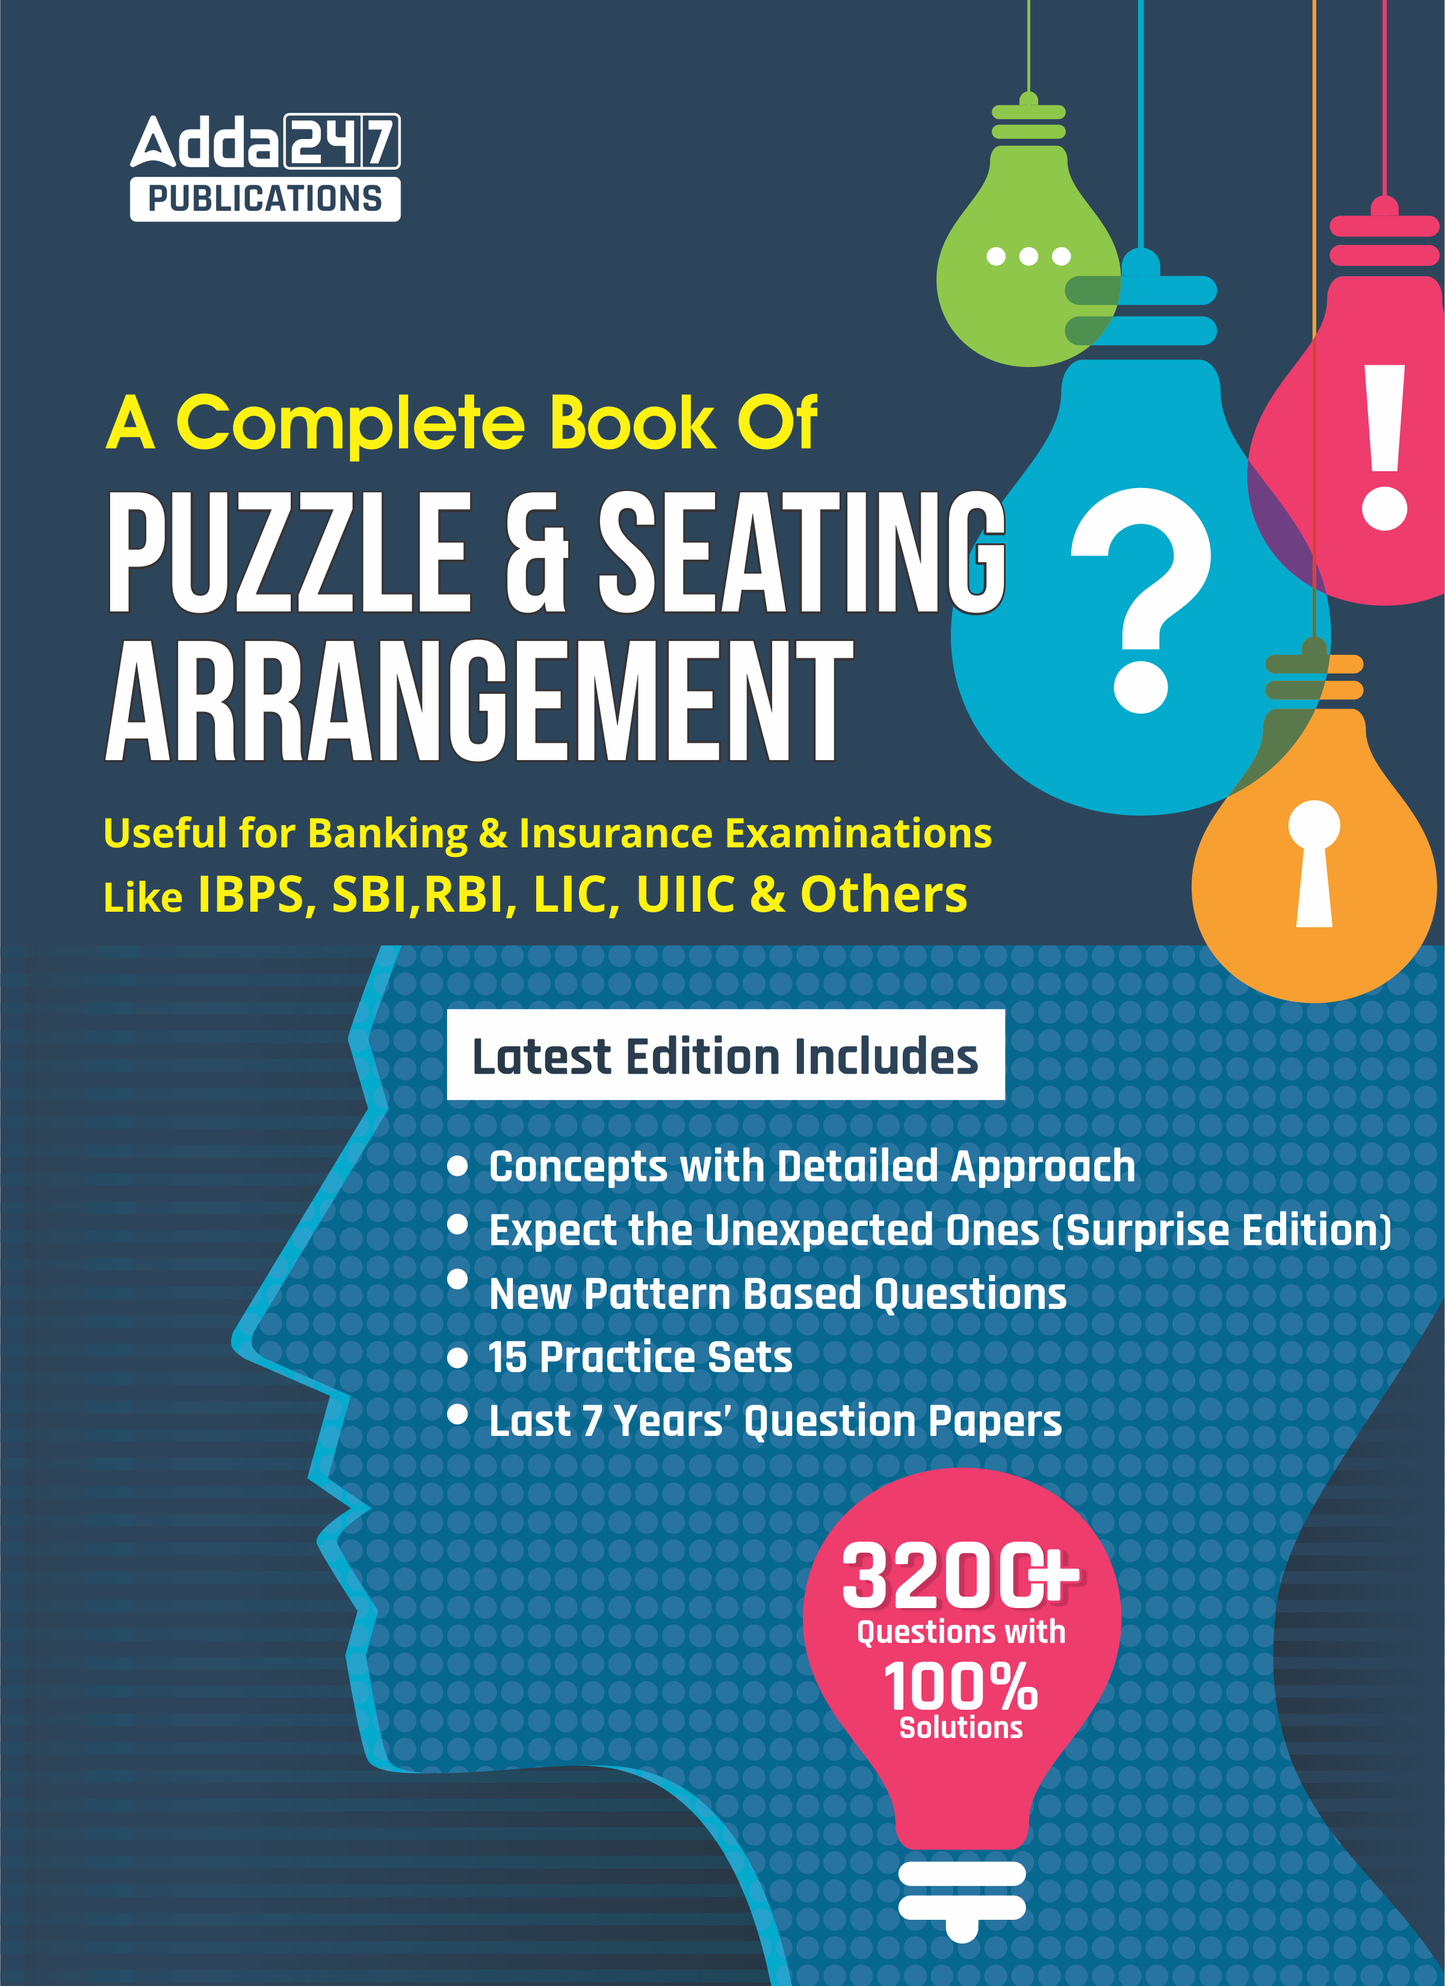 A Complete Book of Puzzles & Seating Arrangement (Third Printed English Edition) By Adda247